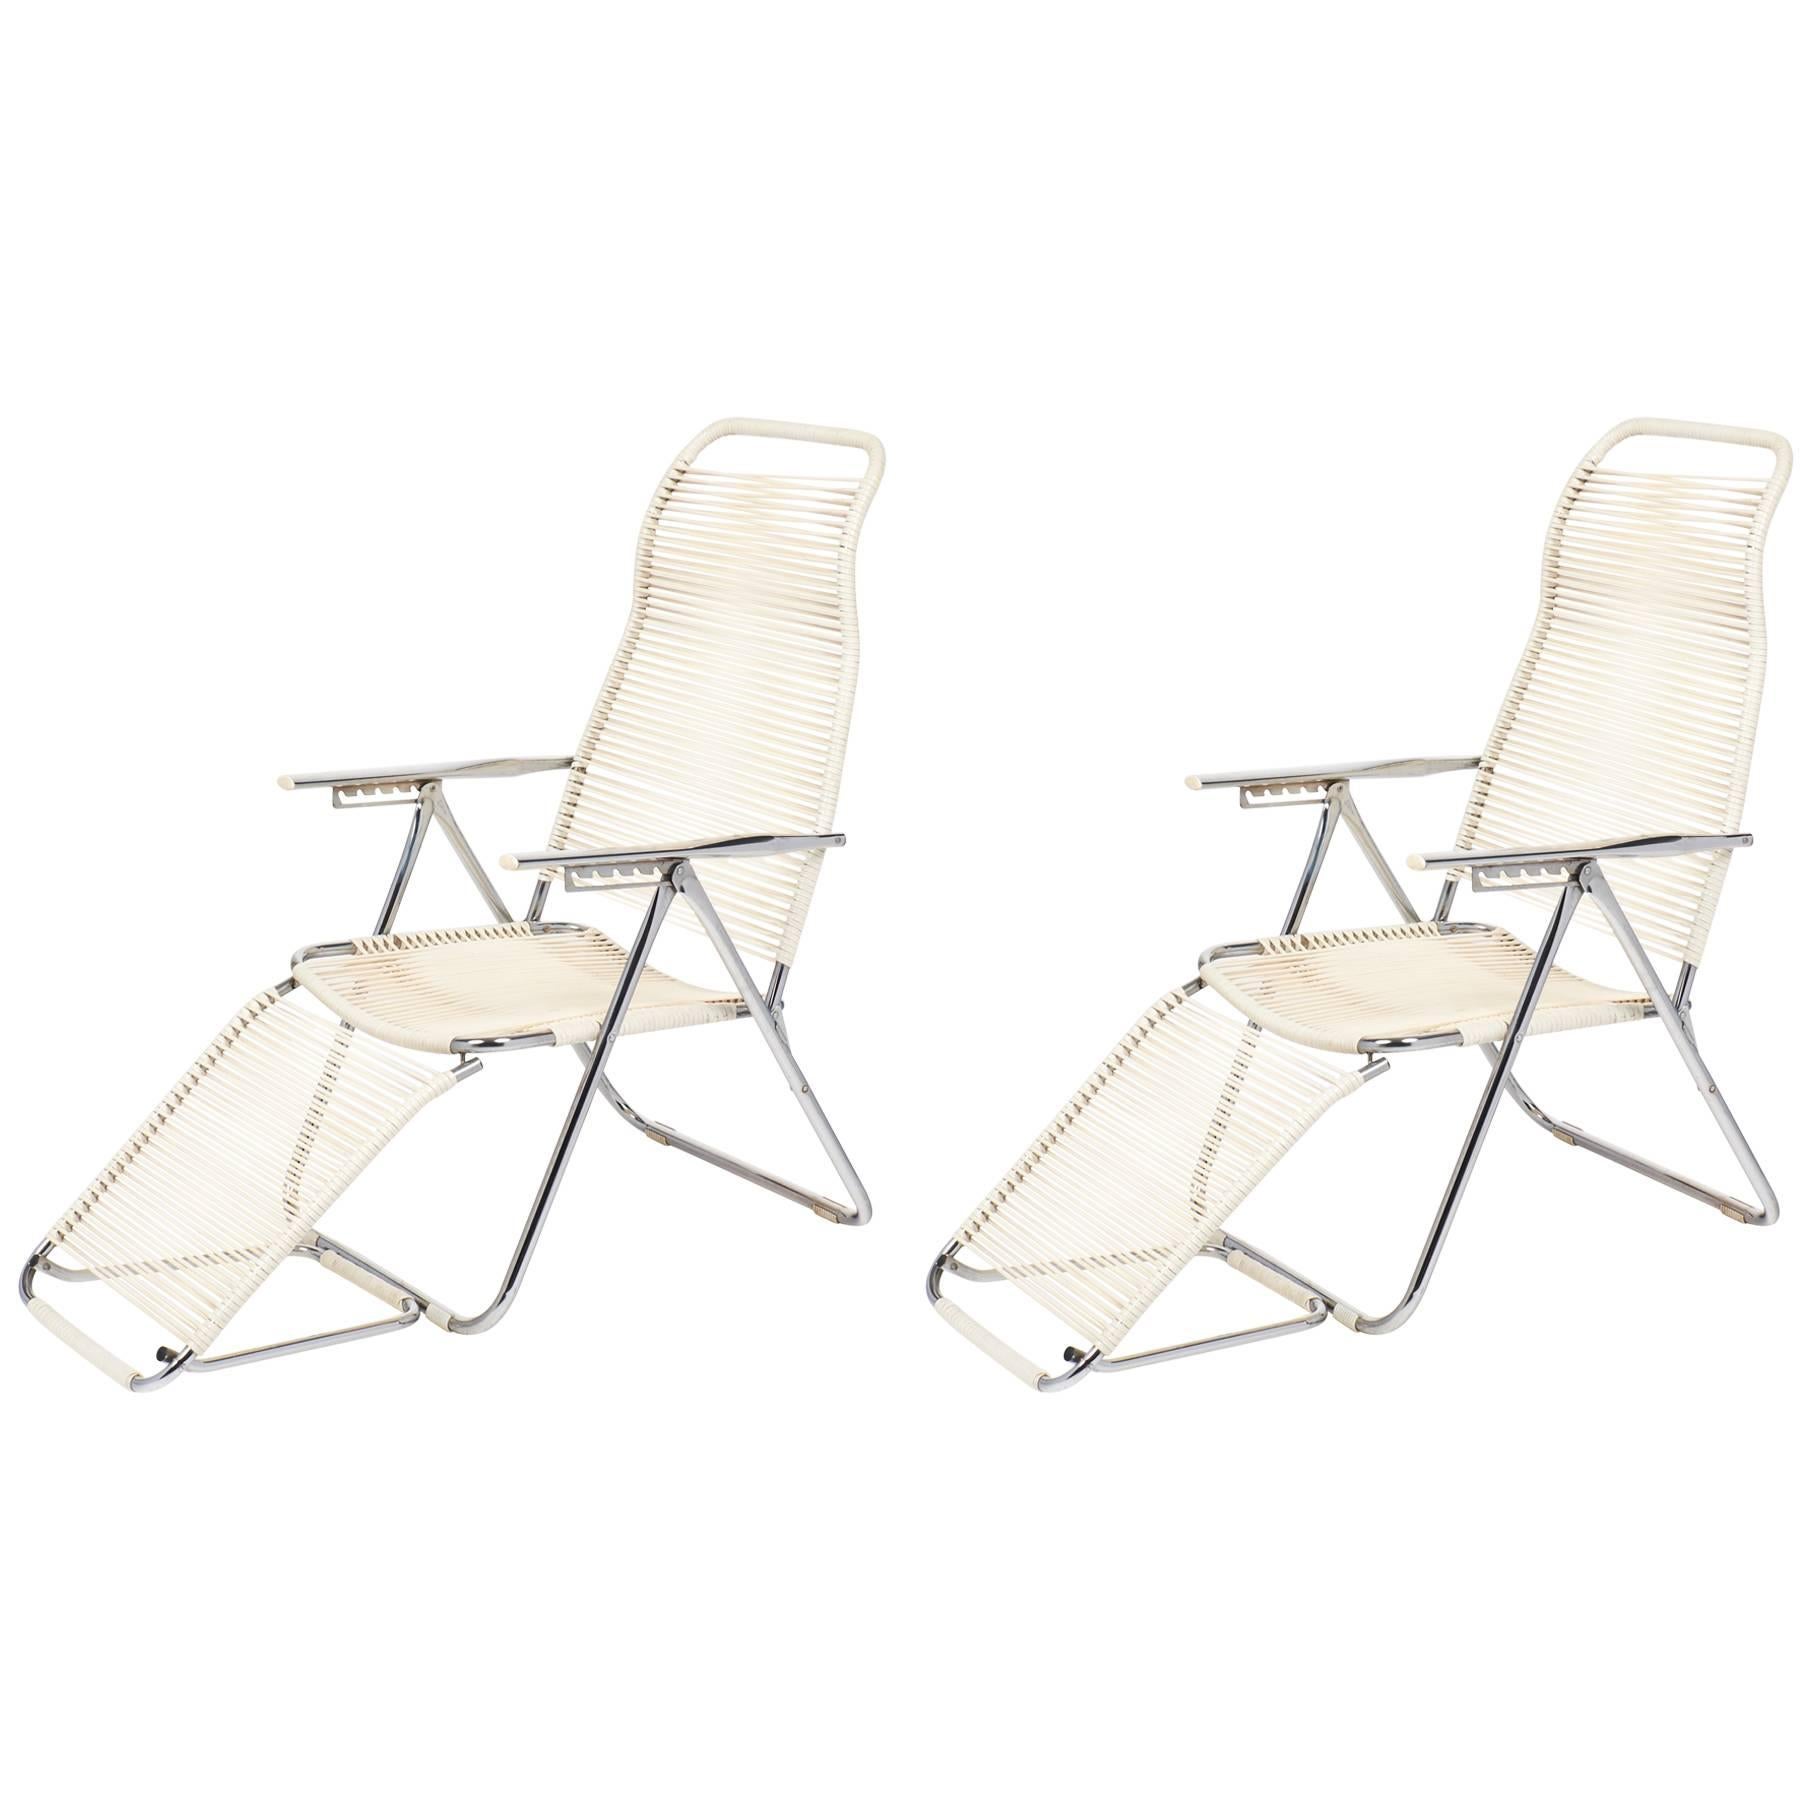 Pair of French Vintage Adjustable "Chaises Longues"